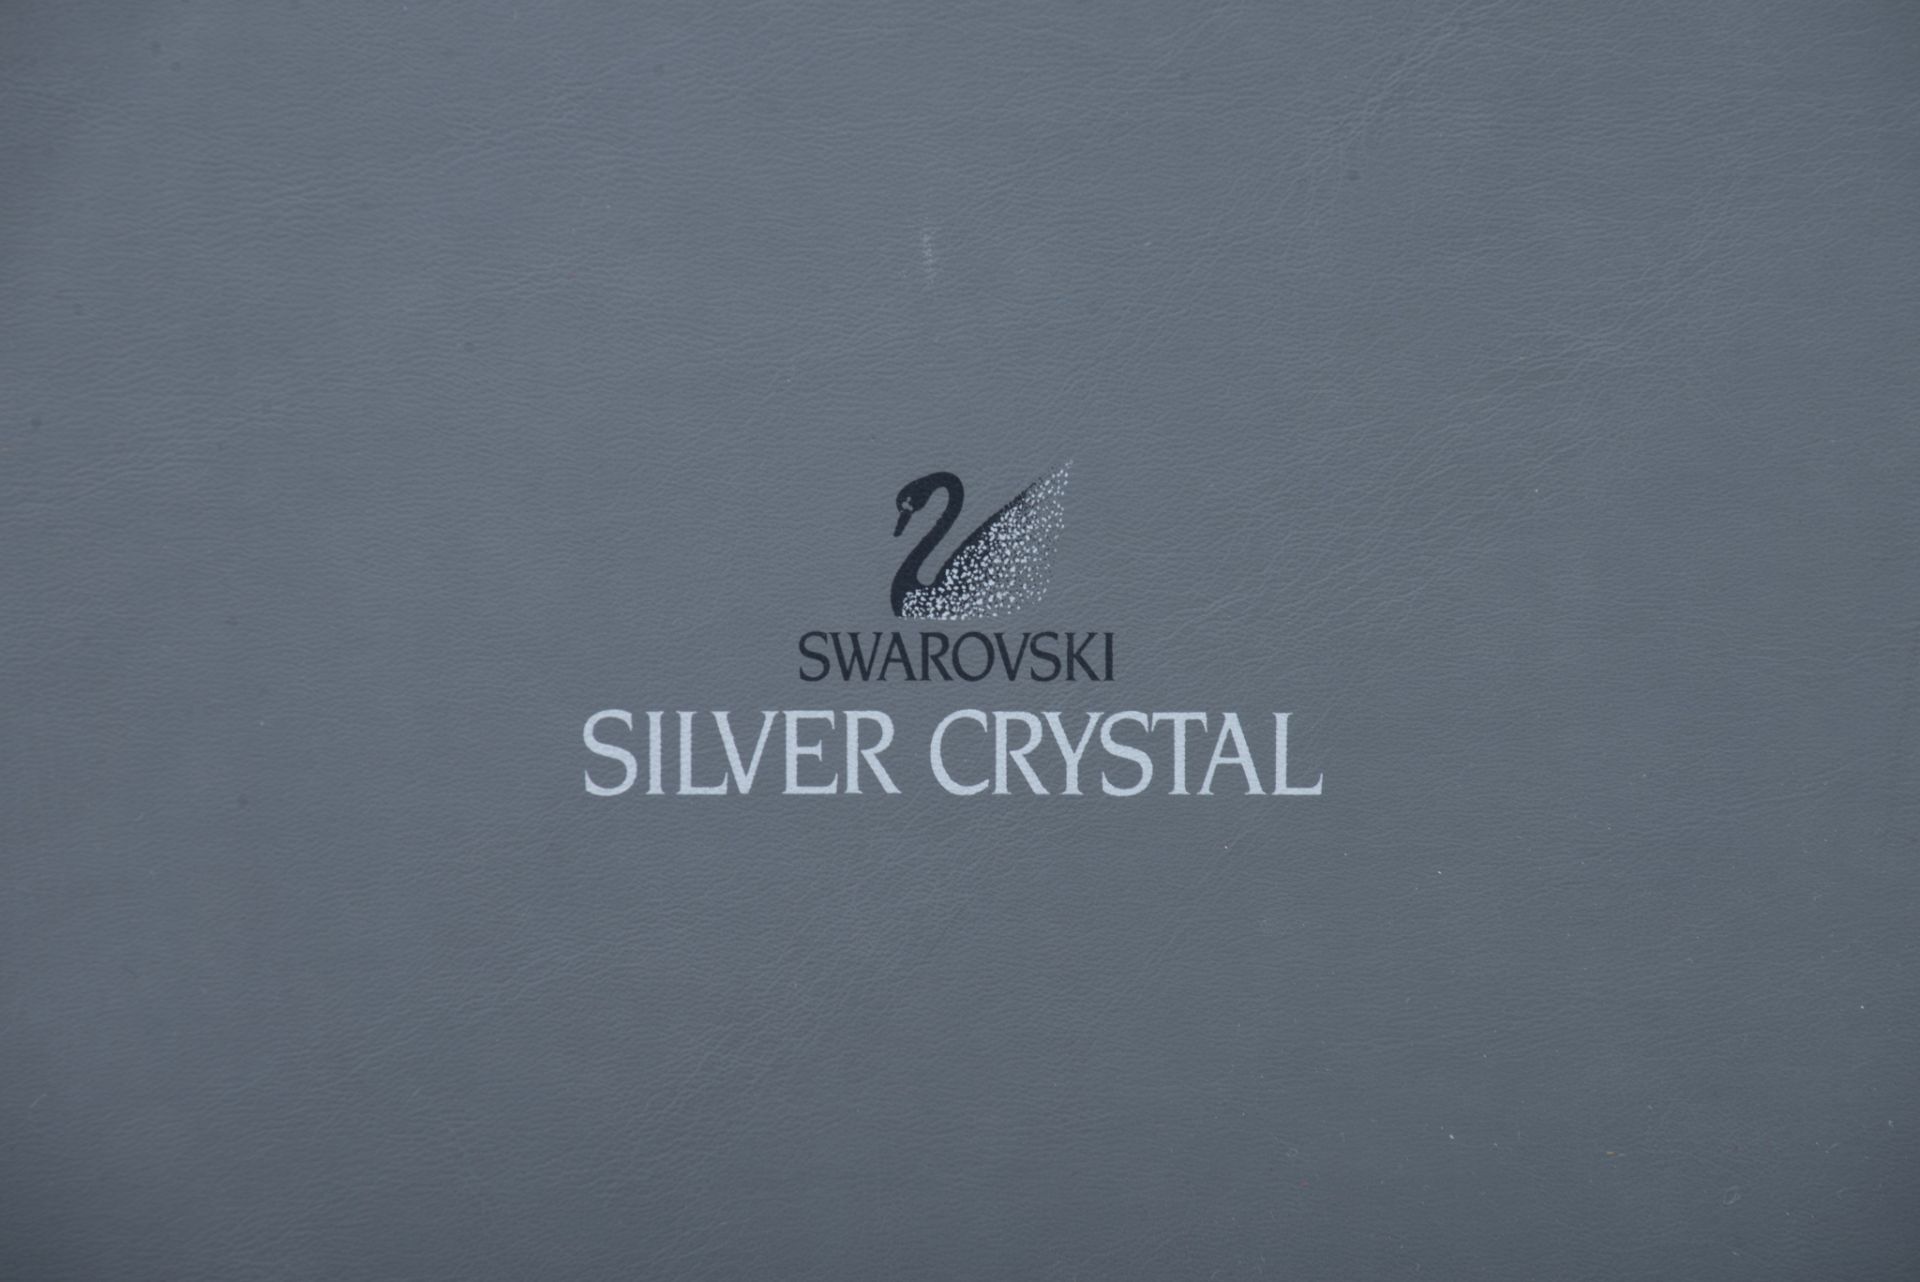 A Swarovski silver crystal chess set in a luxurious box - Image 14 of 17